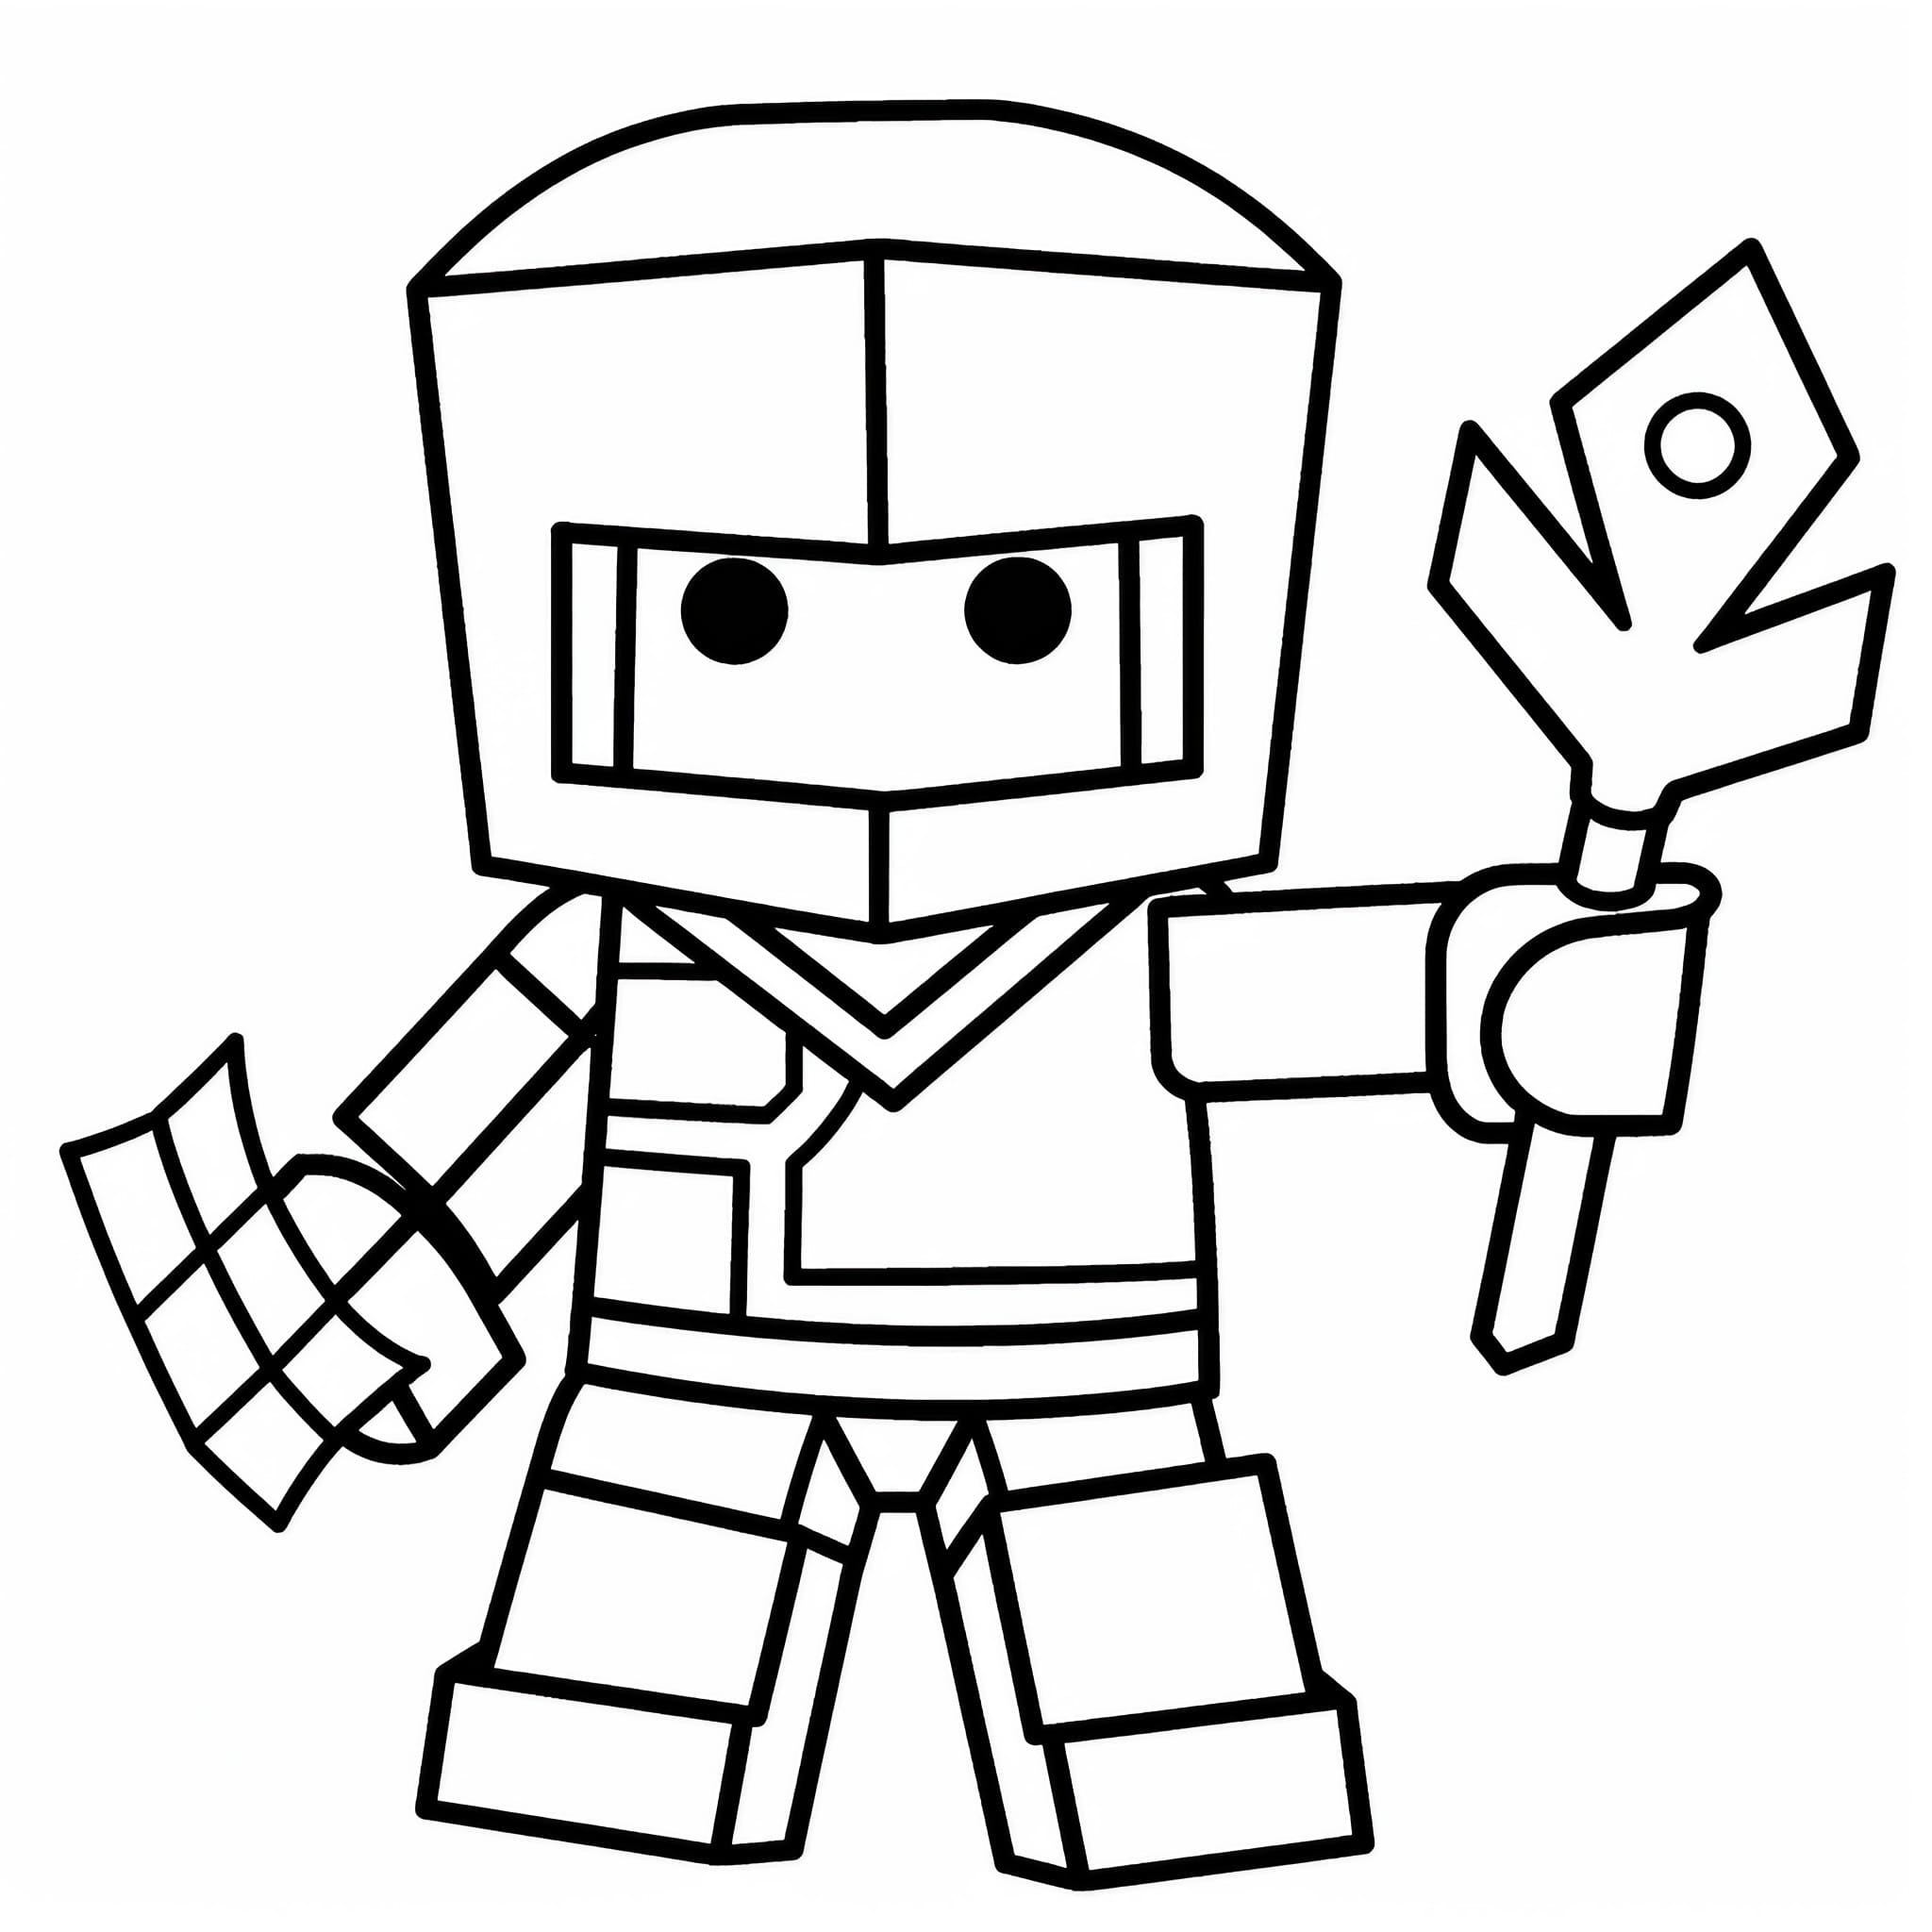 Roblox coloring pages for free and printable